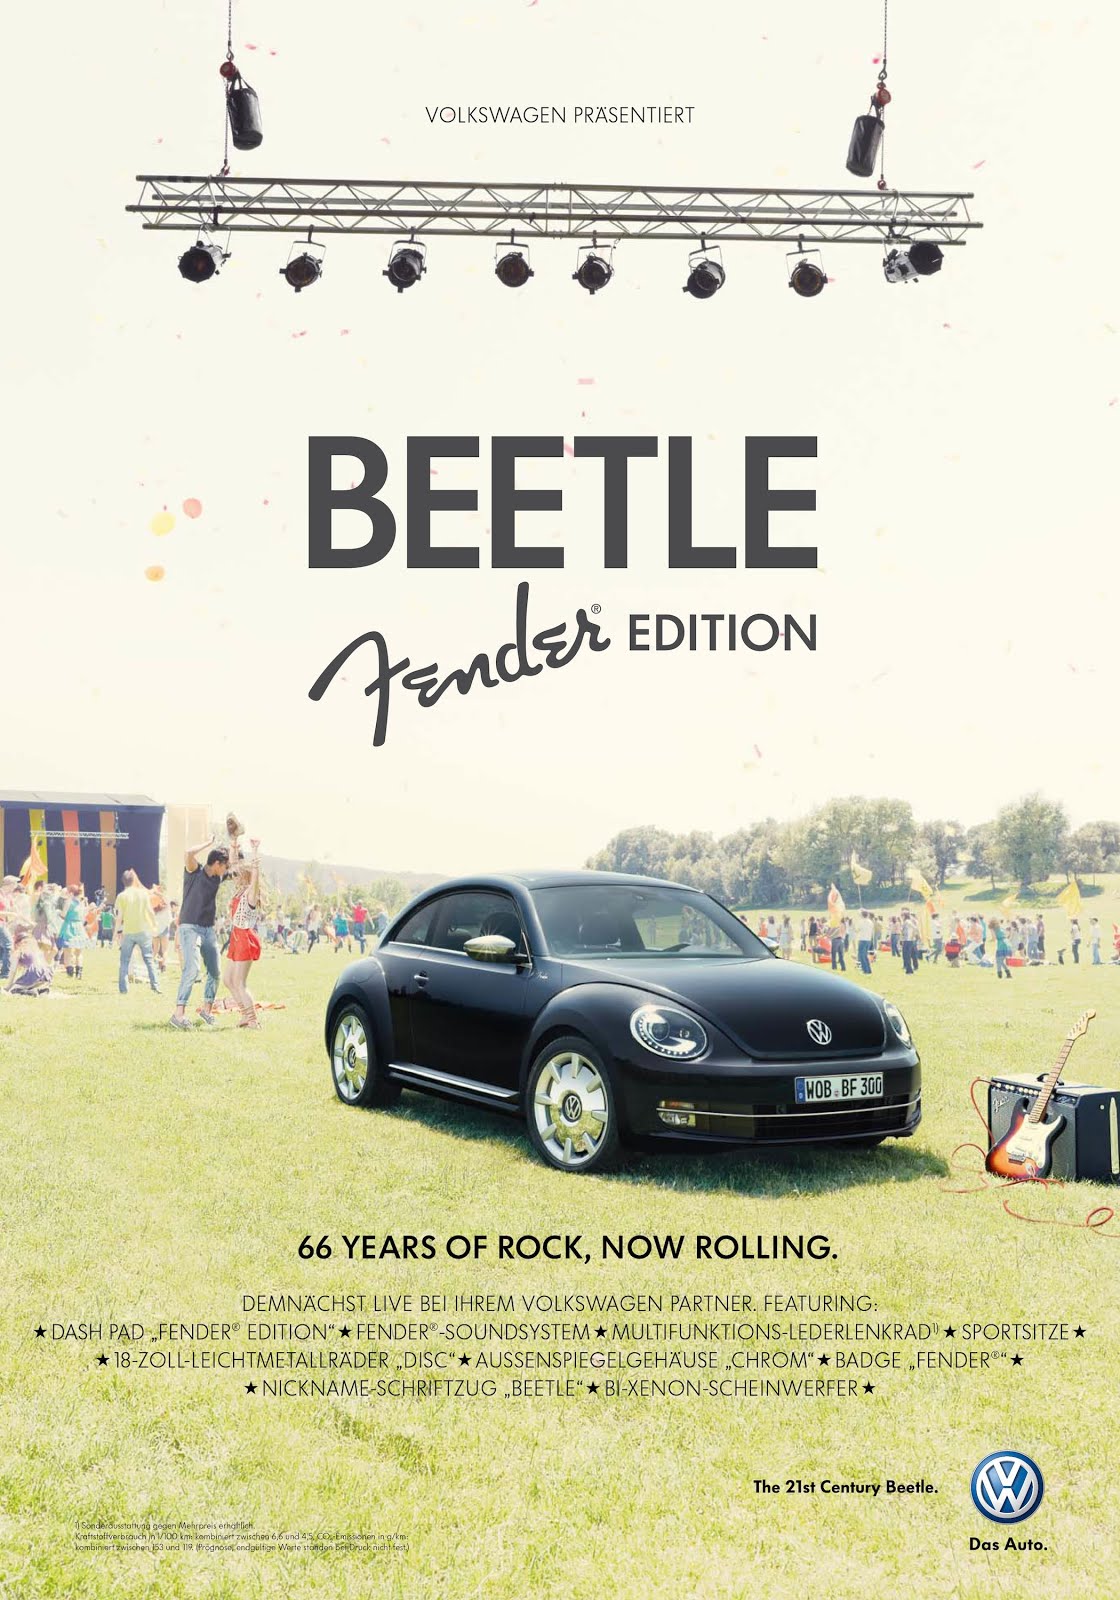 The VW Beetle just got louder with the release of the Beetle Fender Edition. The three ...1120 x 1600